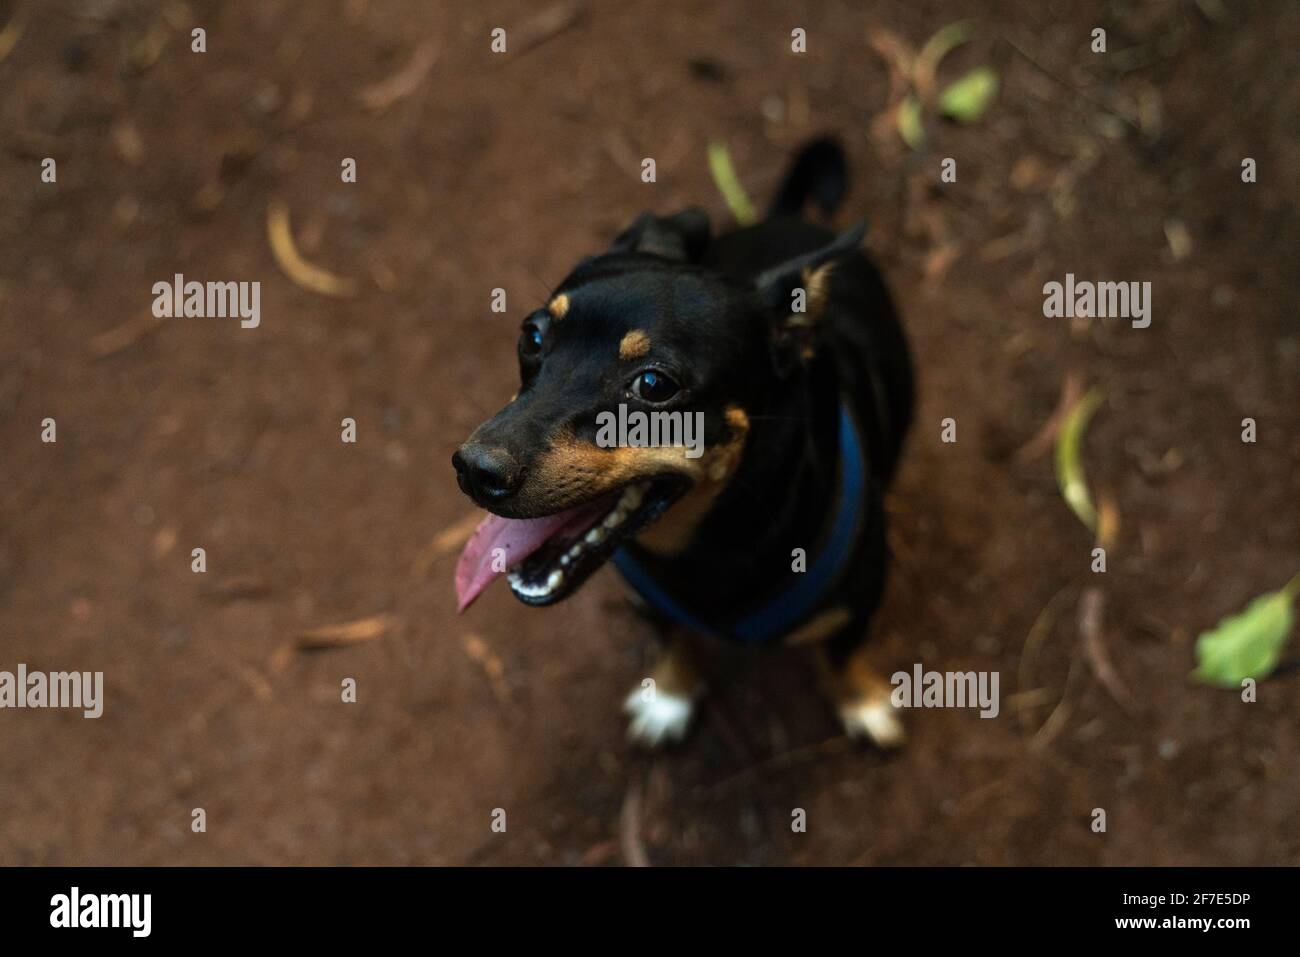 Alamy and photography hi-res Enthused images - stock